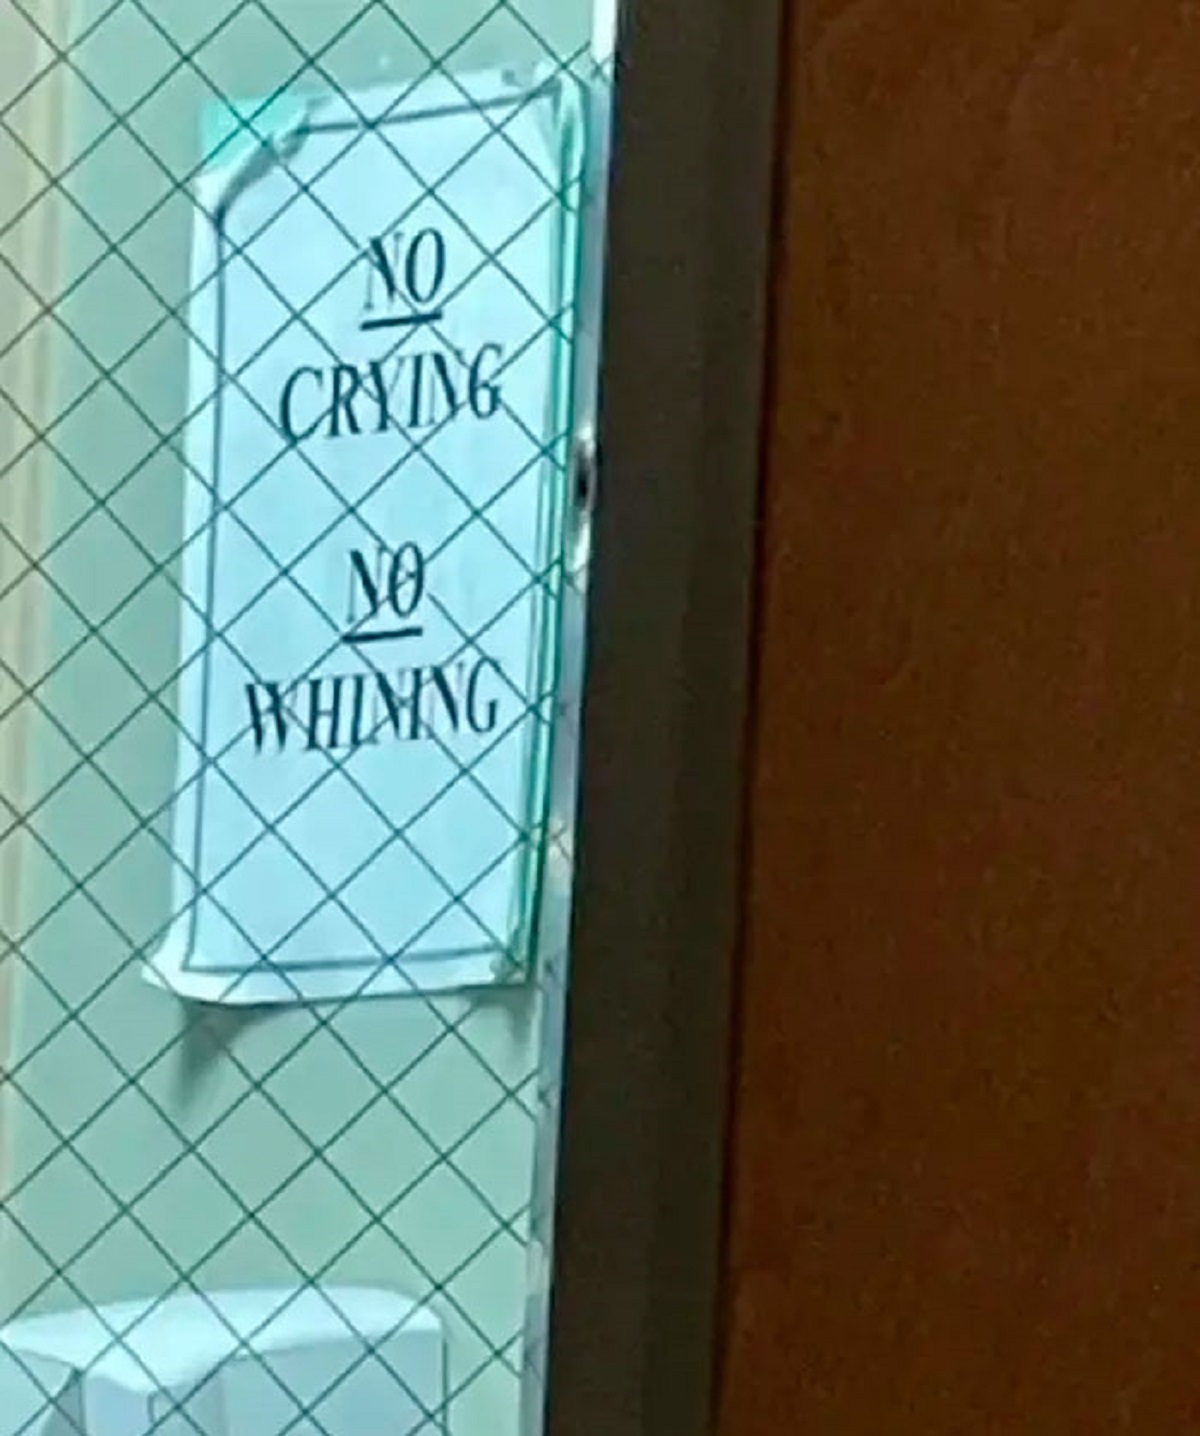 Toxic workplace - No Crying No Whining